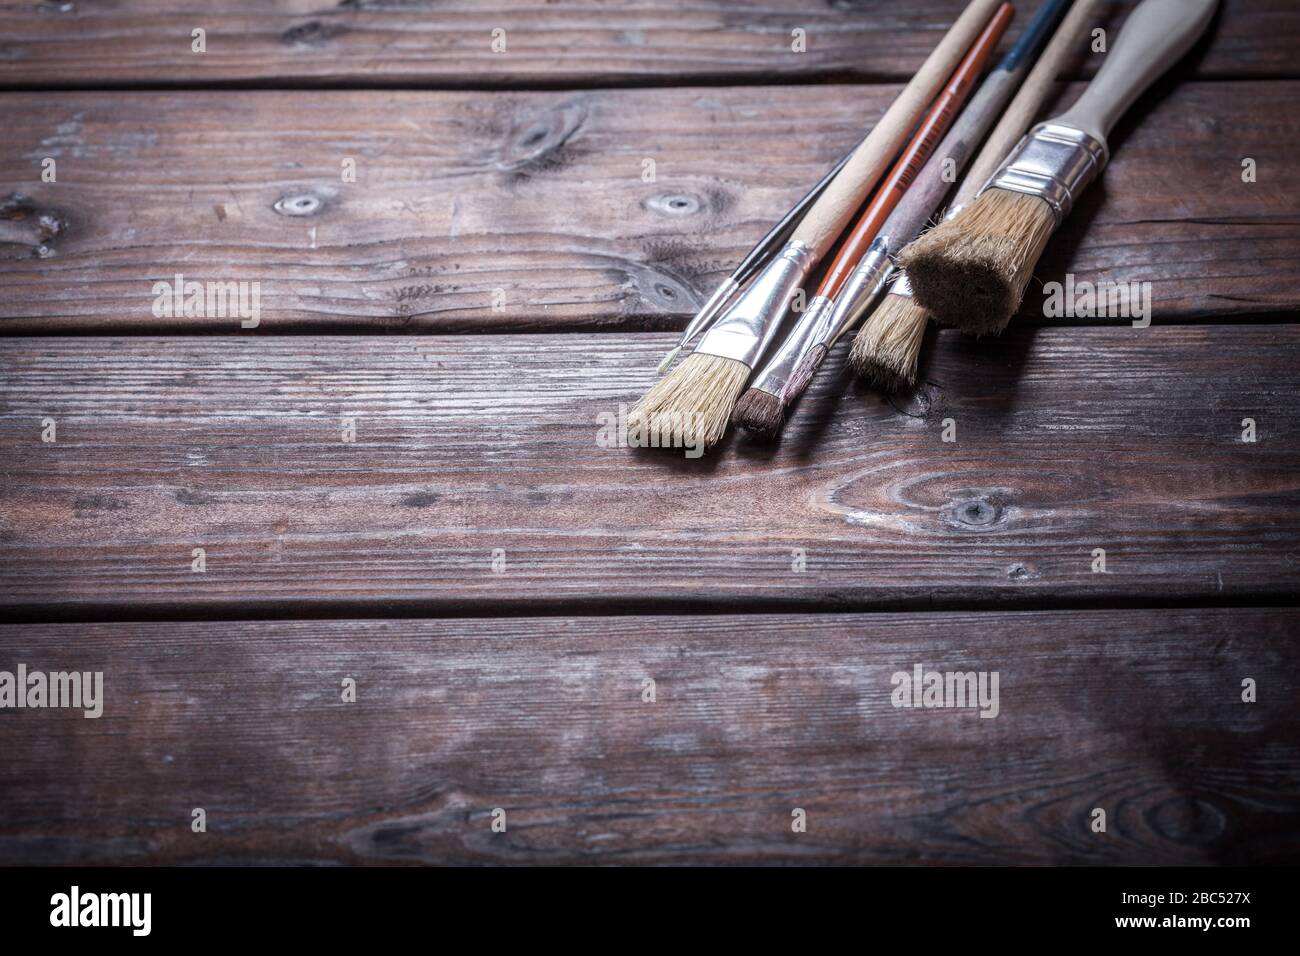 Close-up of Artist paint brushes over natural wooden background Stock Photo